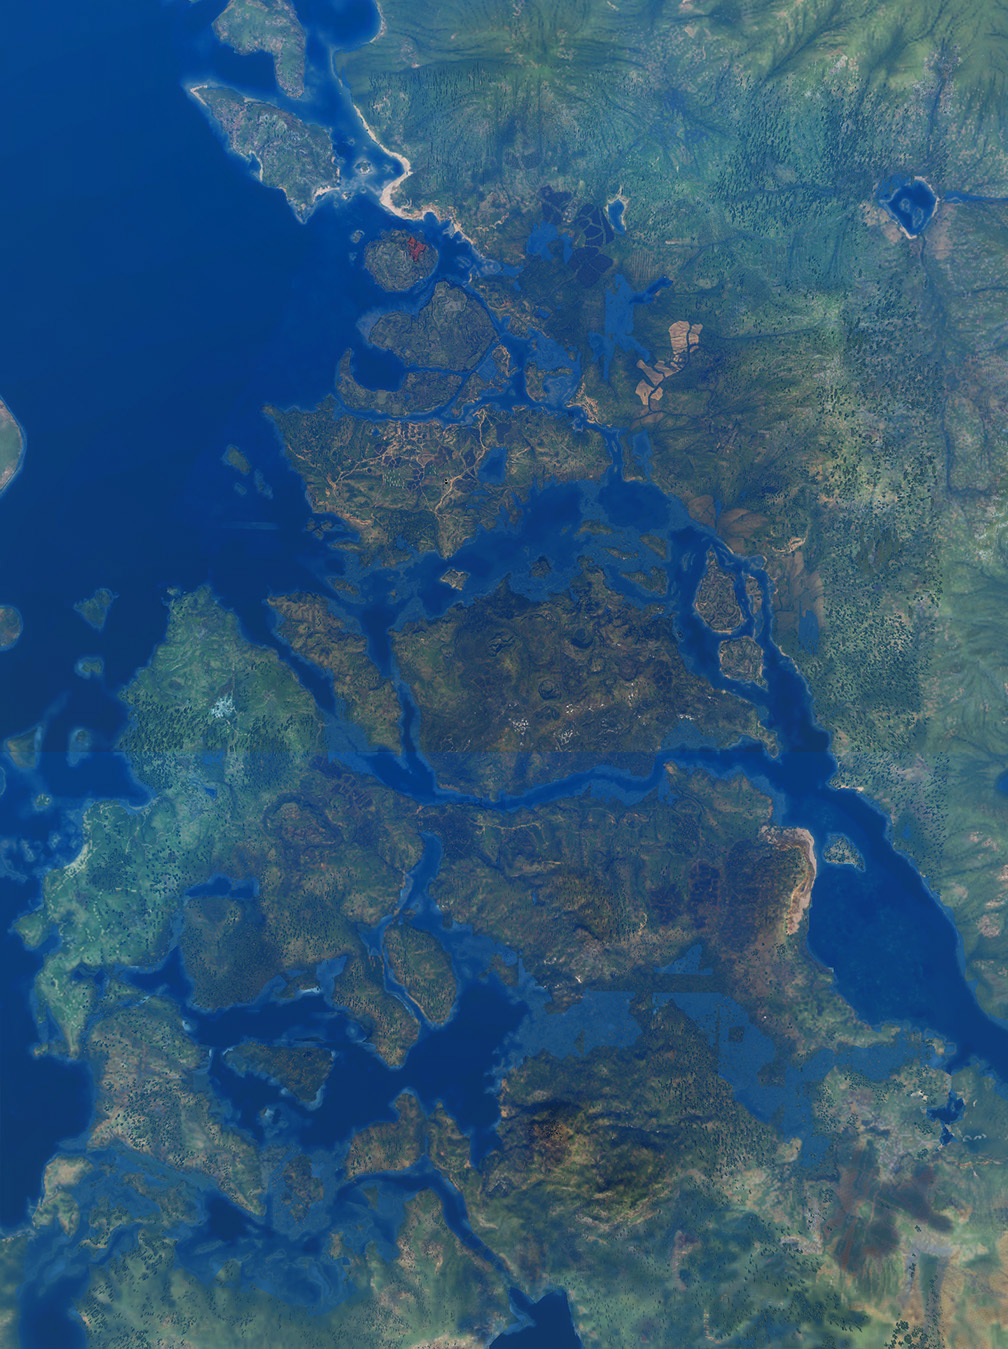 The Witcher 3 Aerial Shots Are Like Satellite Photos